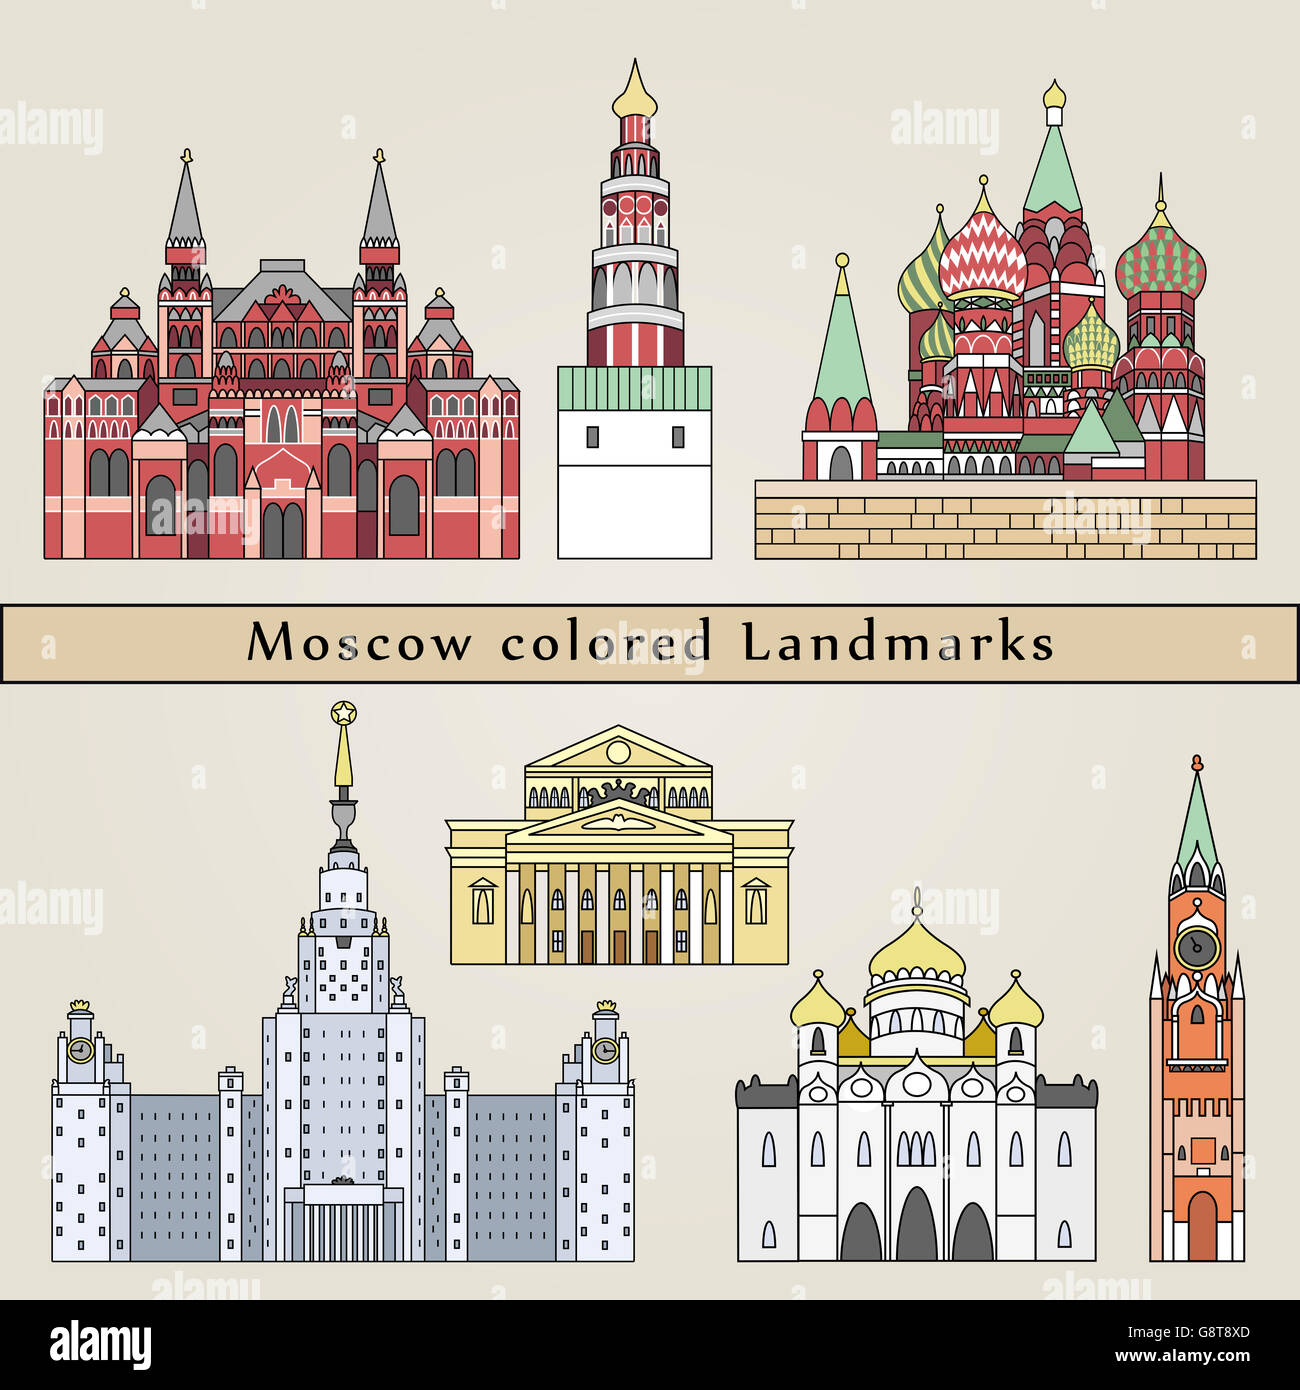 Moscow colored Landmarks in editable vector file Stock Photo